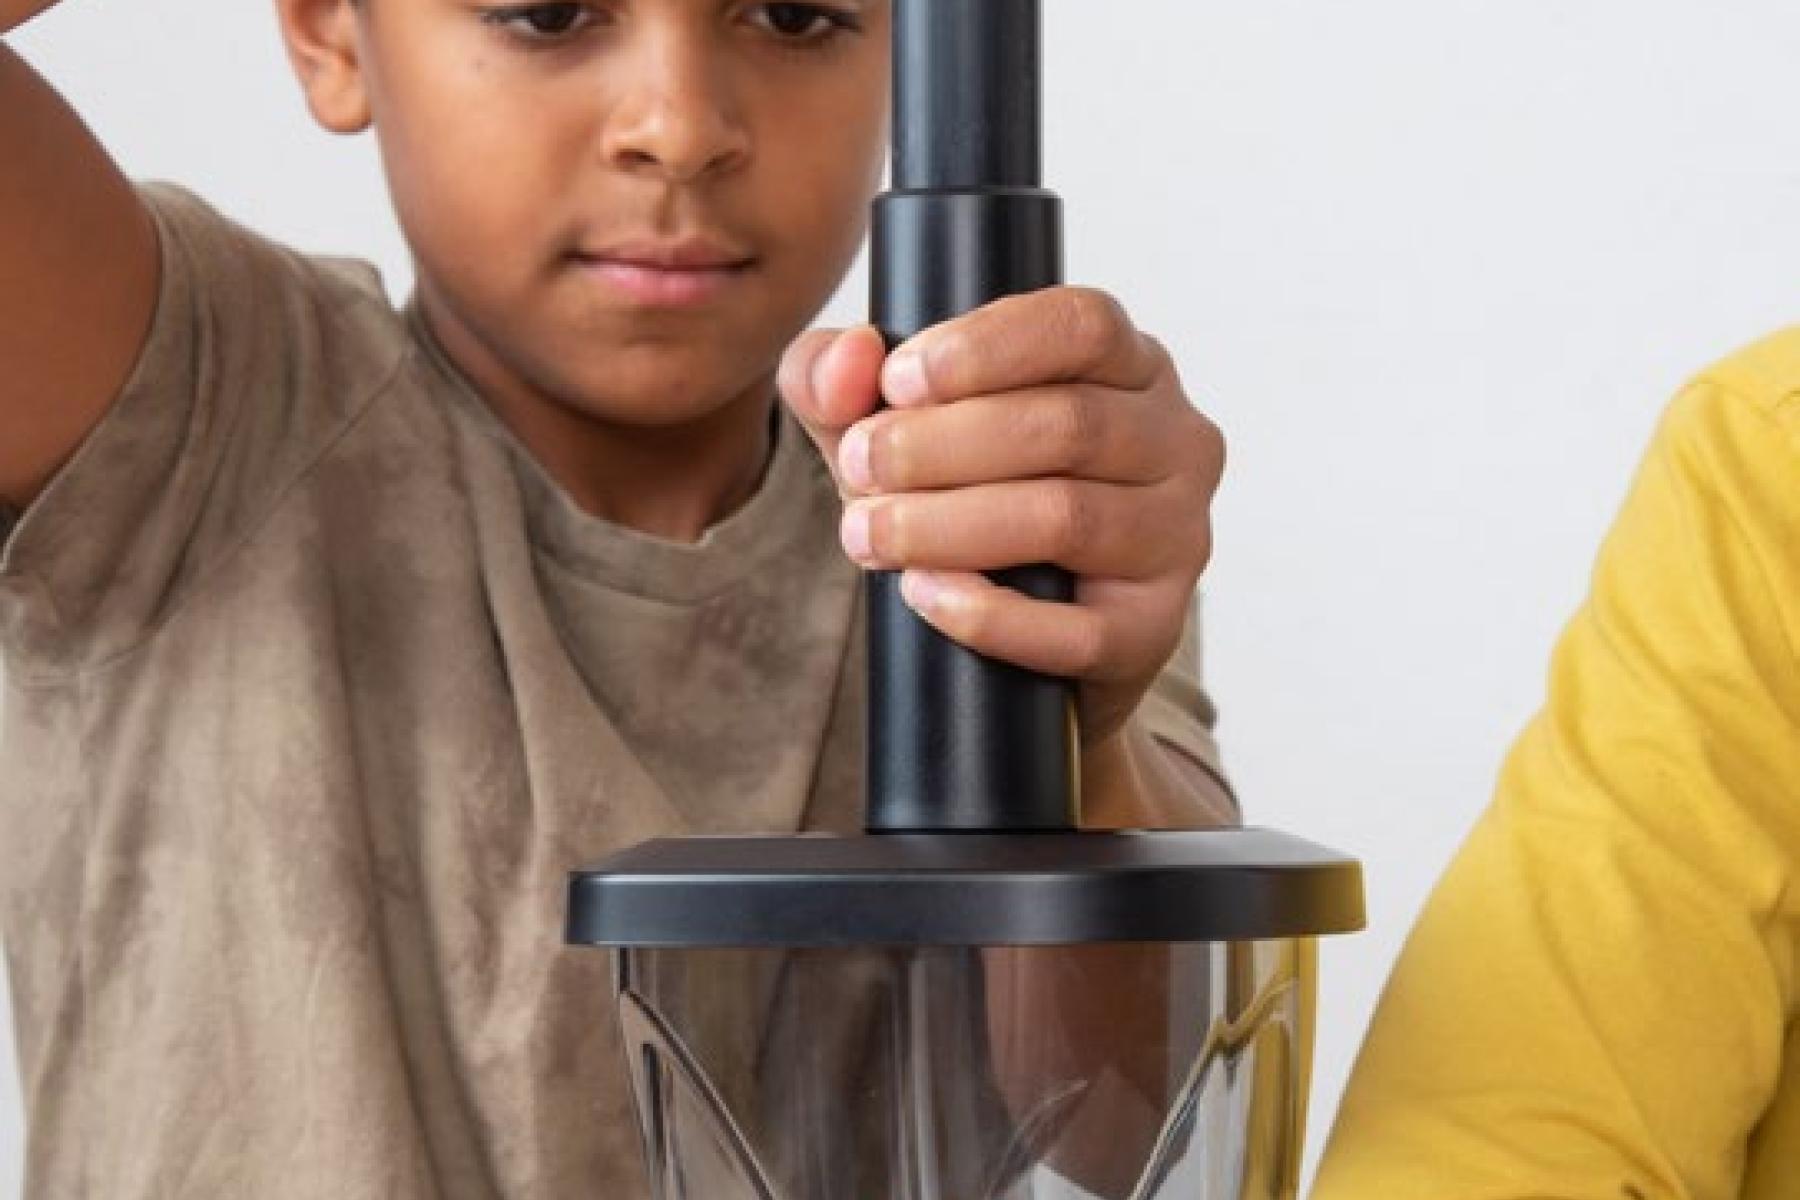 A child uses a hand pump to remove air from a vacuum-seal container that has an inflated balloon inside.